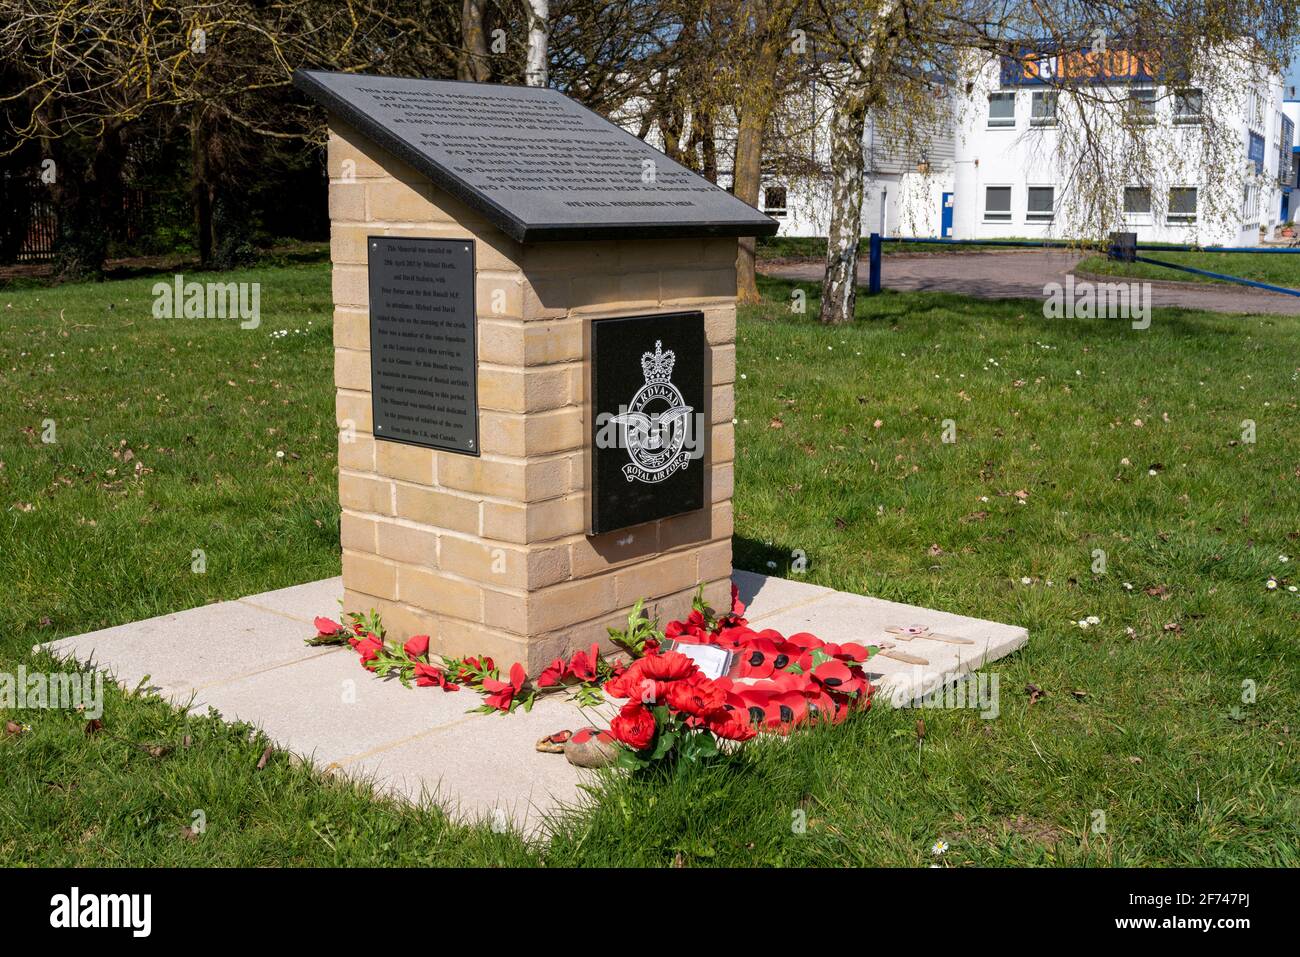 Memorial to the crew members killed in the crash of a wartime RAF Avro Lancaster in Colchester, Essex, UK. Second World War commemoration site Stock Photo